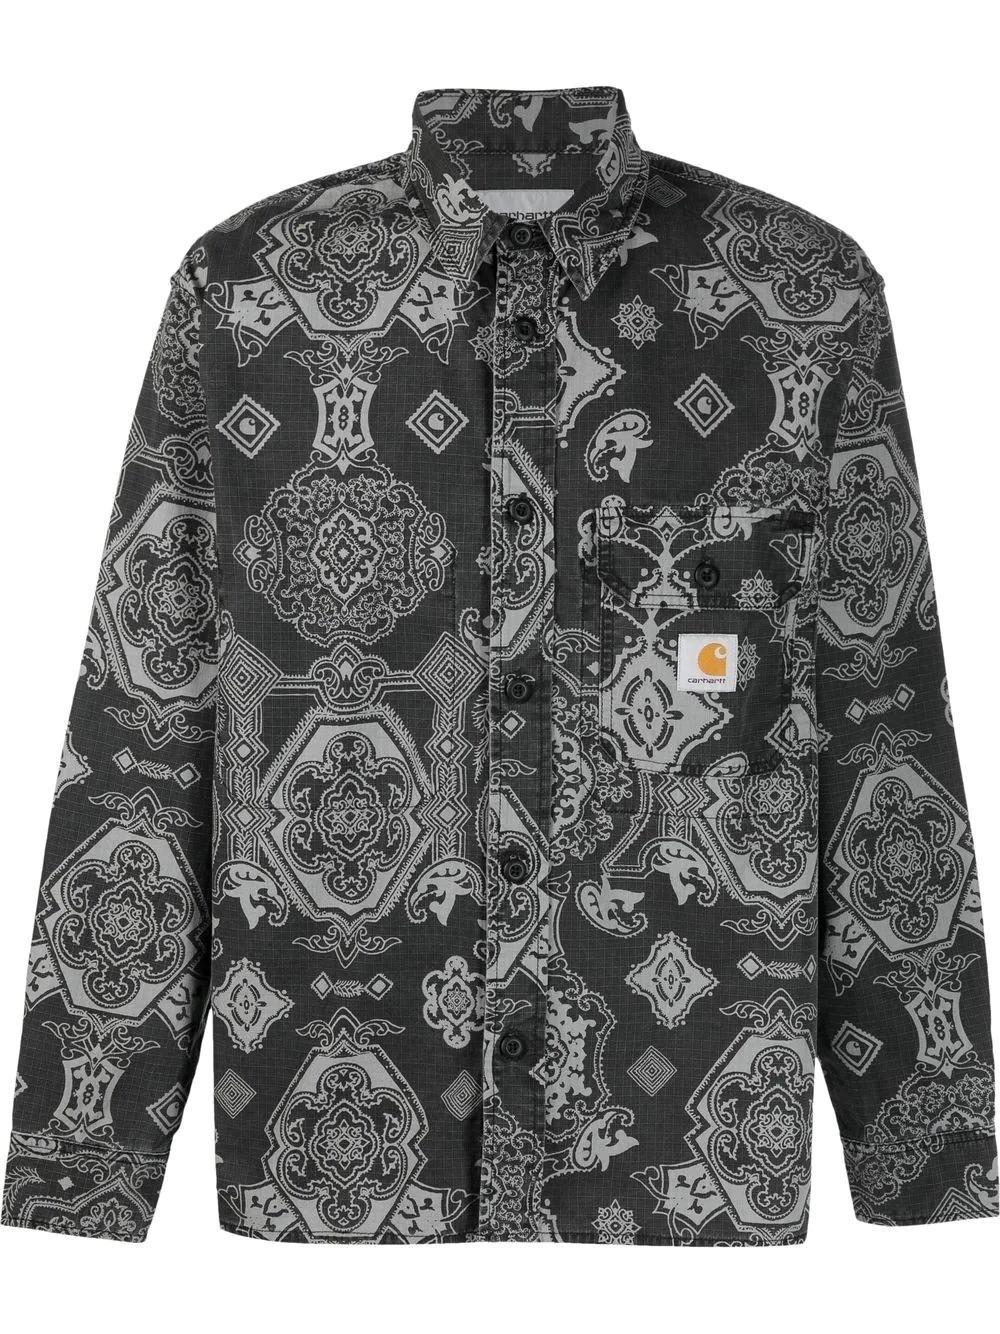 Carhartt WIP Cotton Paisley Pattern in Grey (Gray) for Men - Save 30% | Lyst